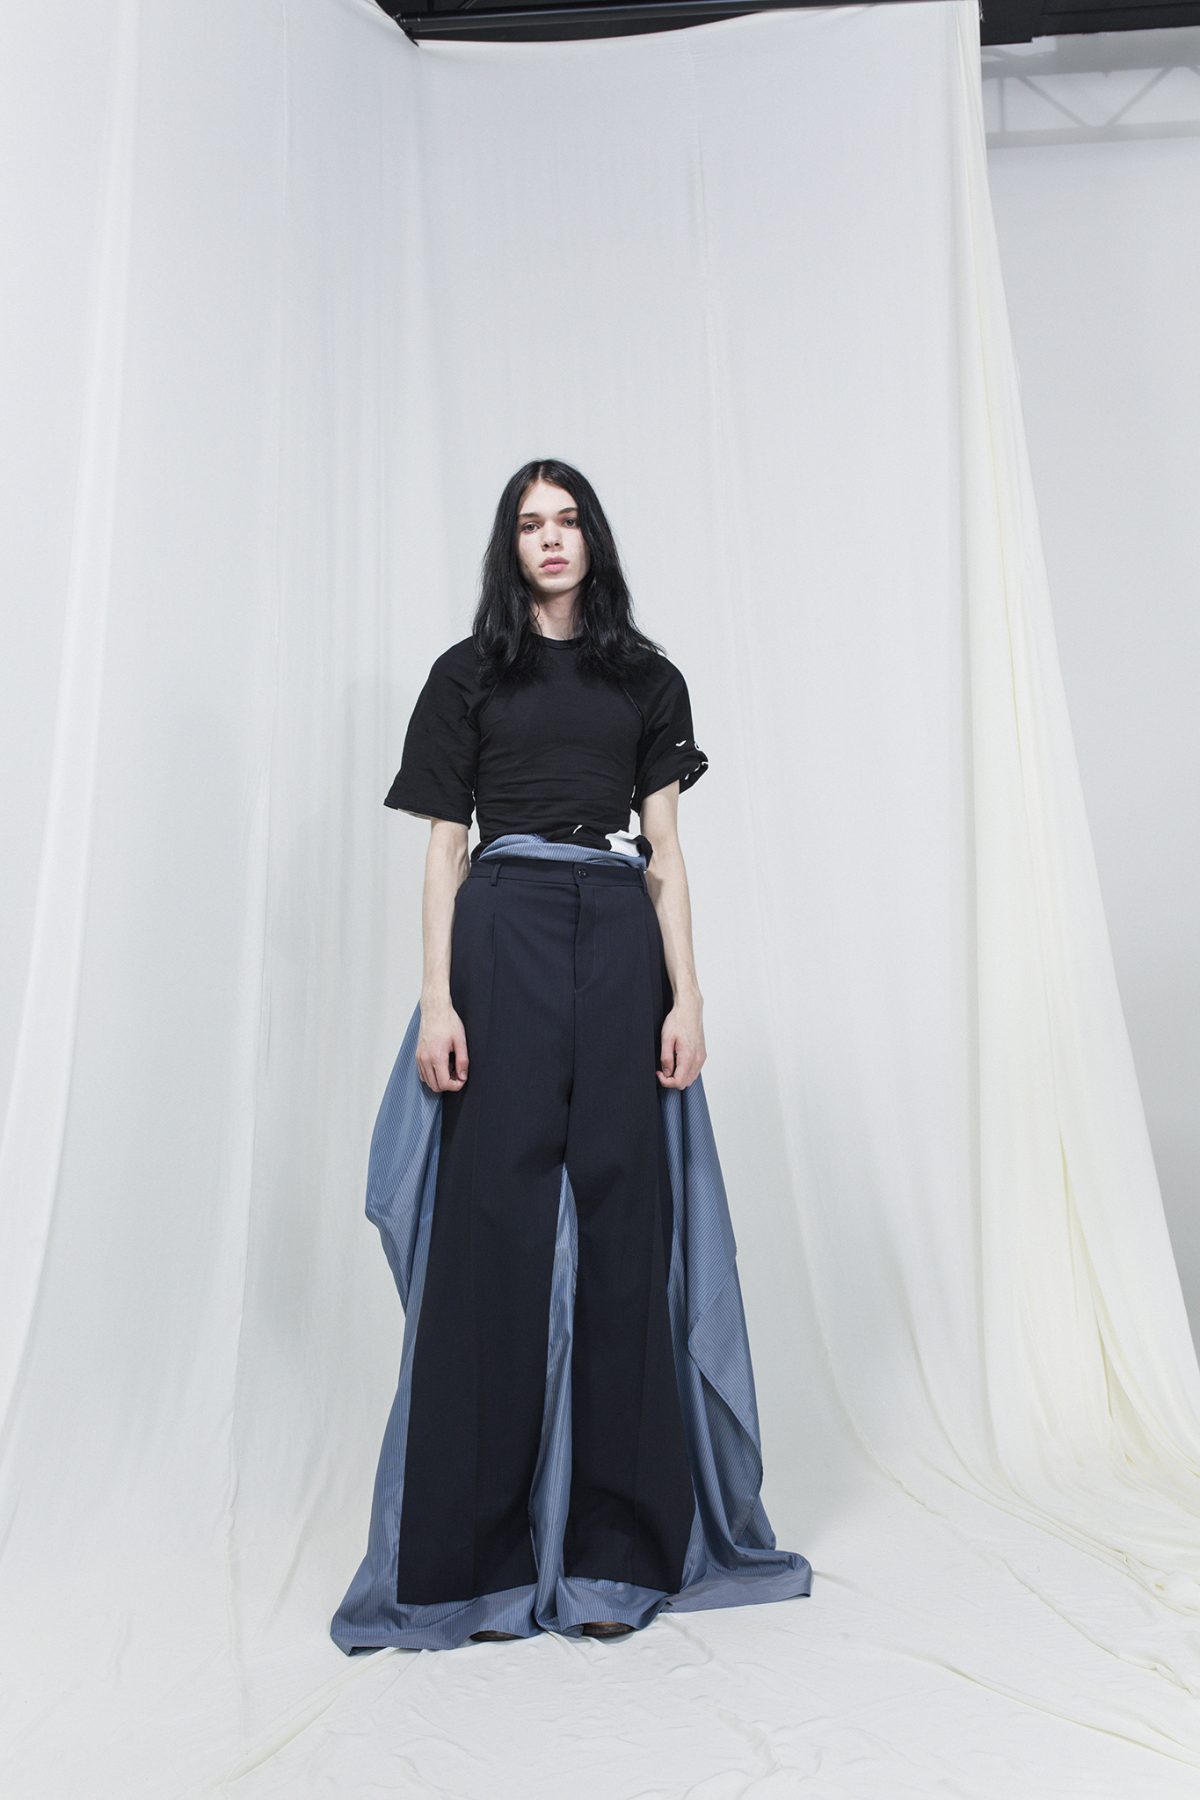 Model wearing a black t-shirt with gray-blue skirt with trousers on top